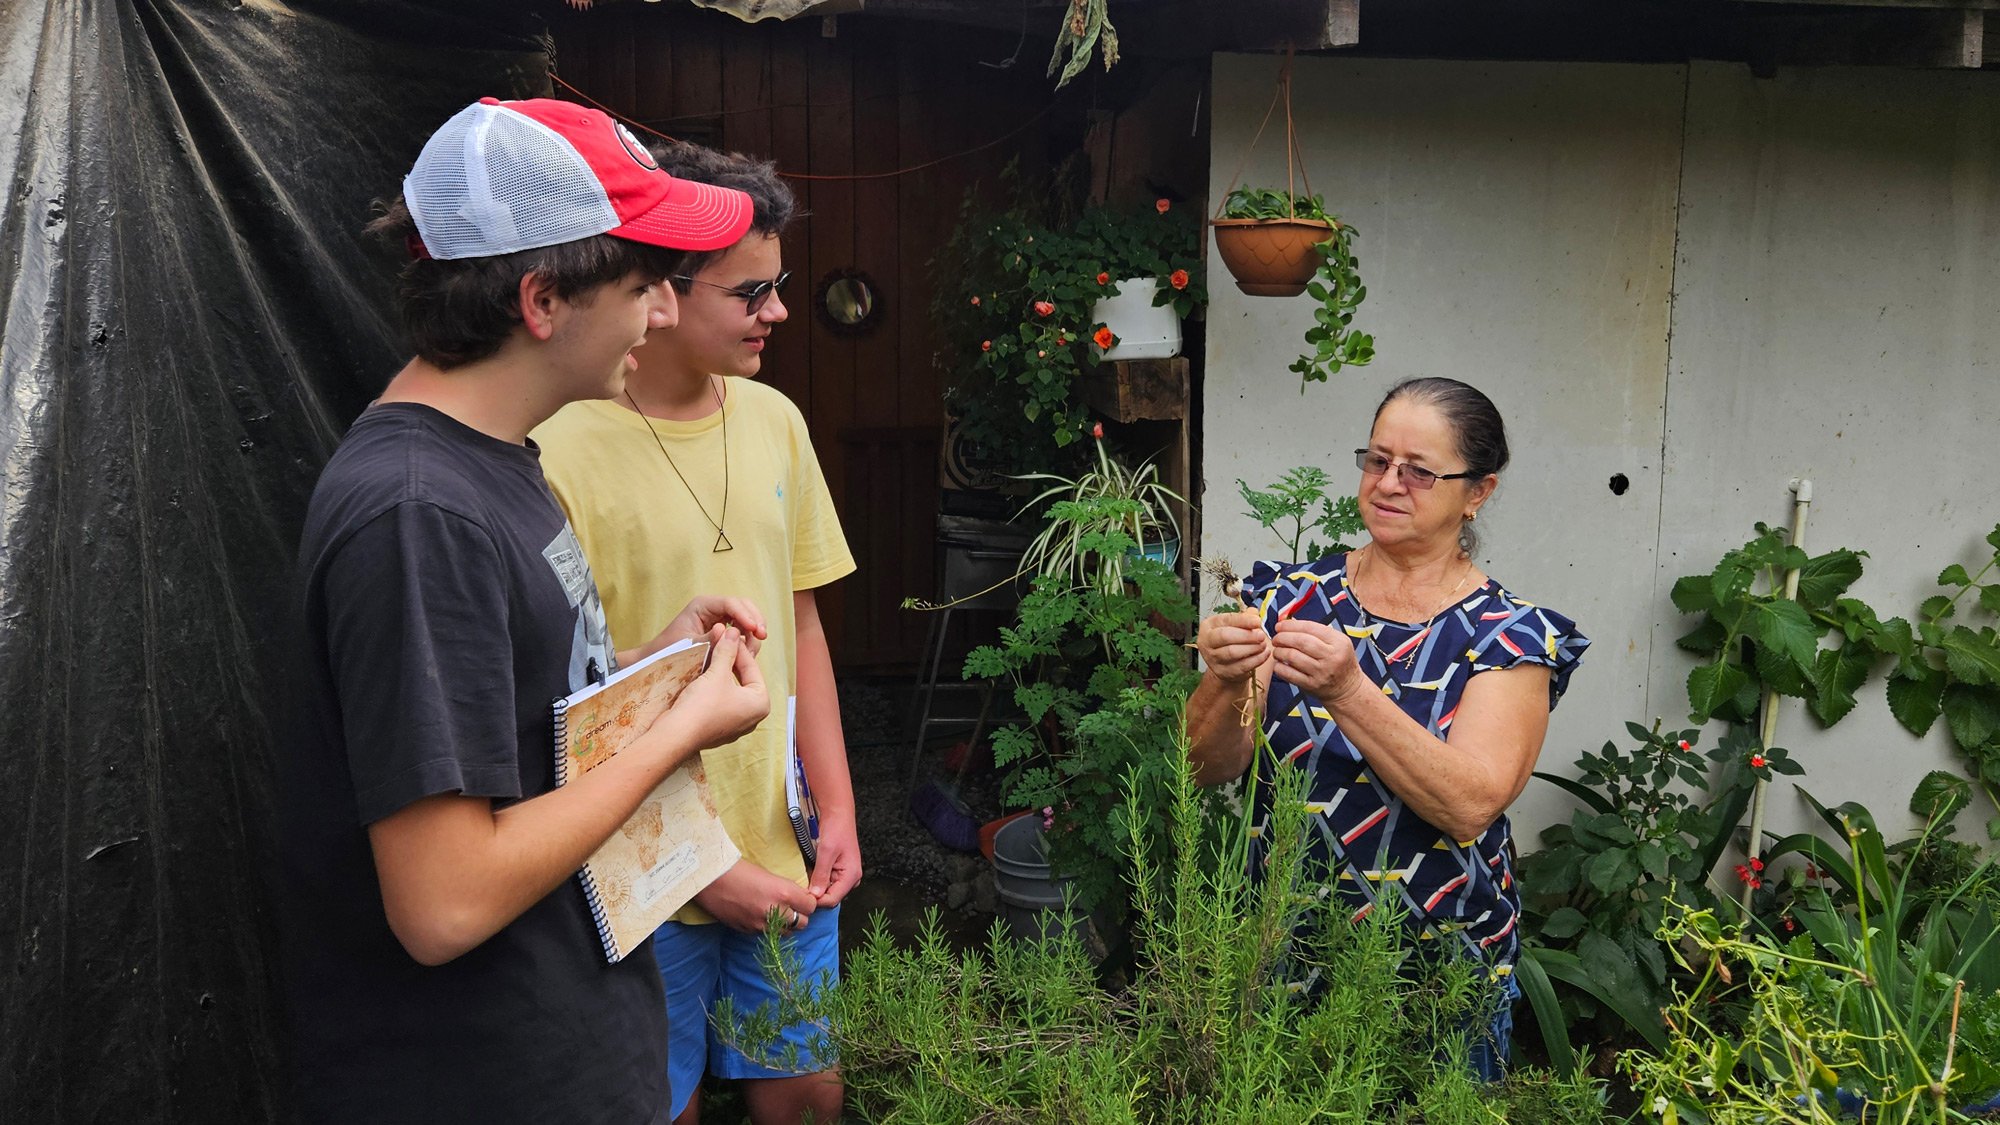 Two 10th Grade students speaking with a local in her garden.